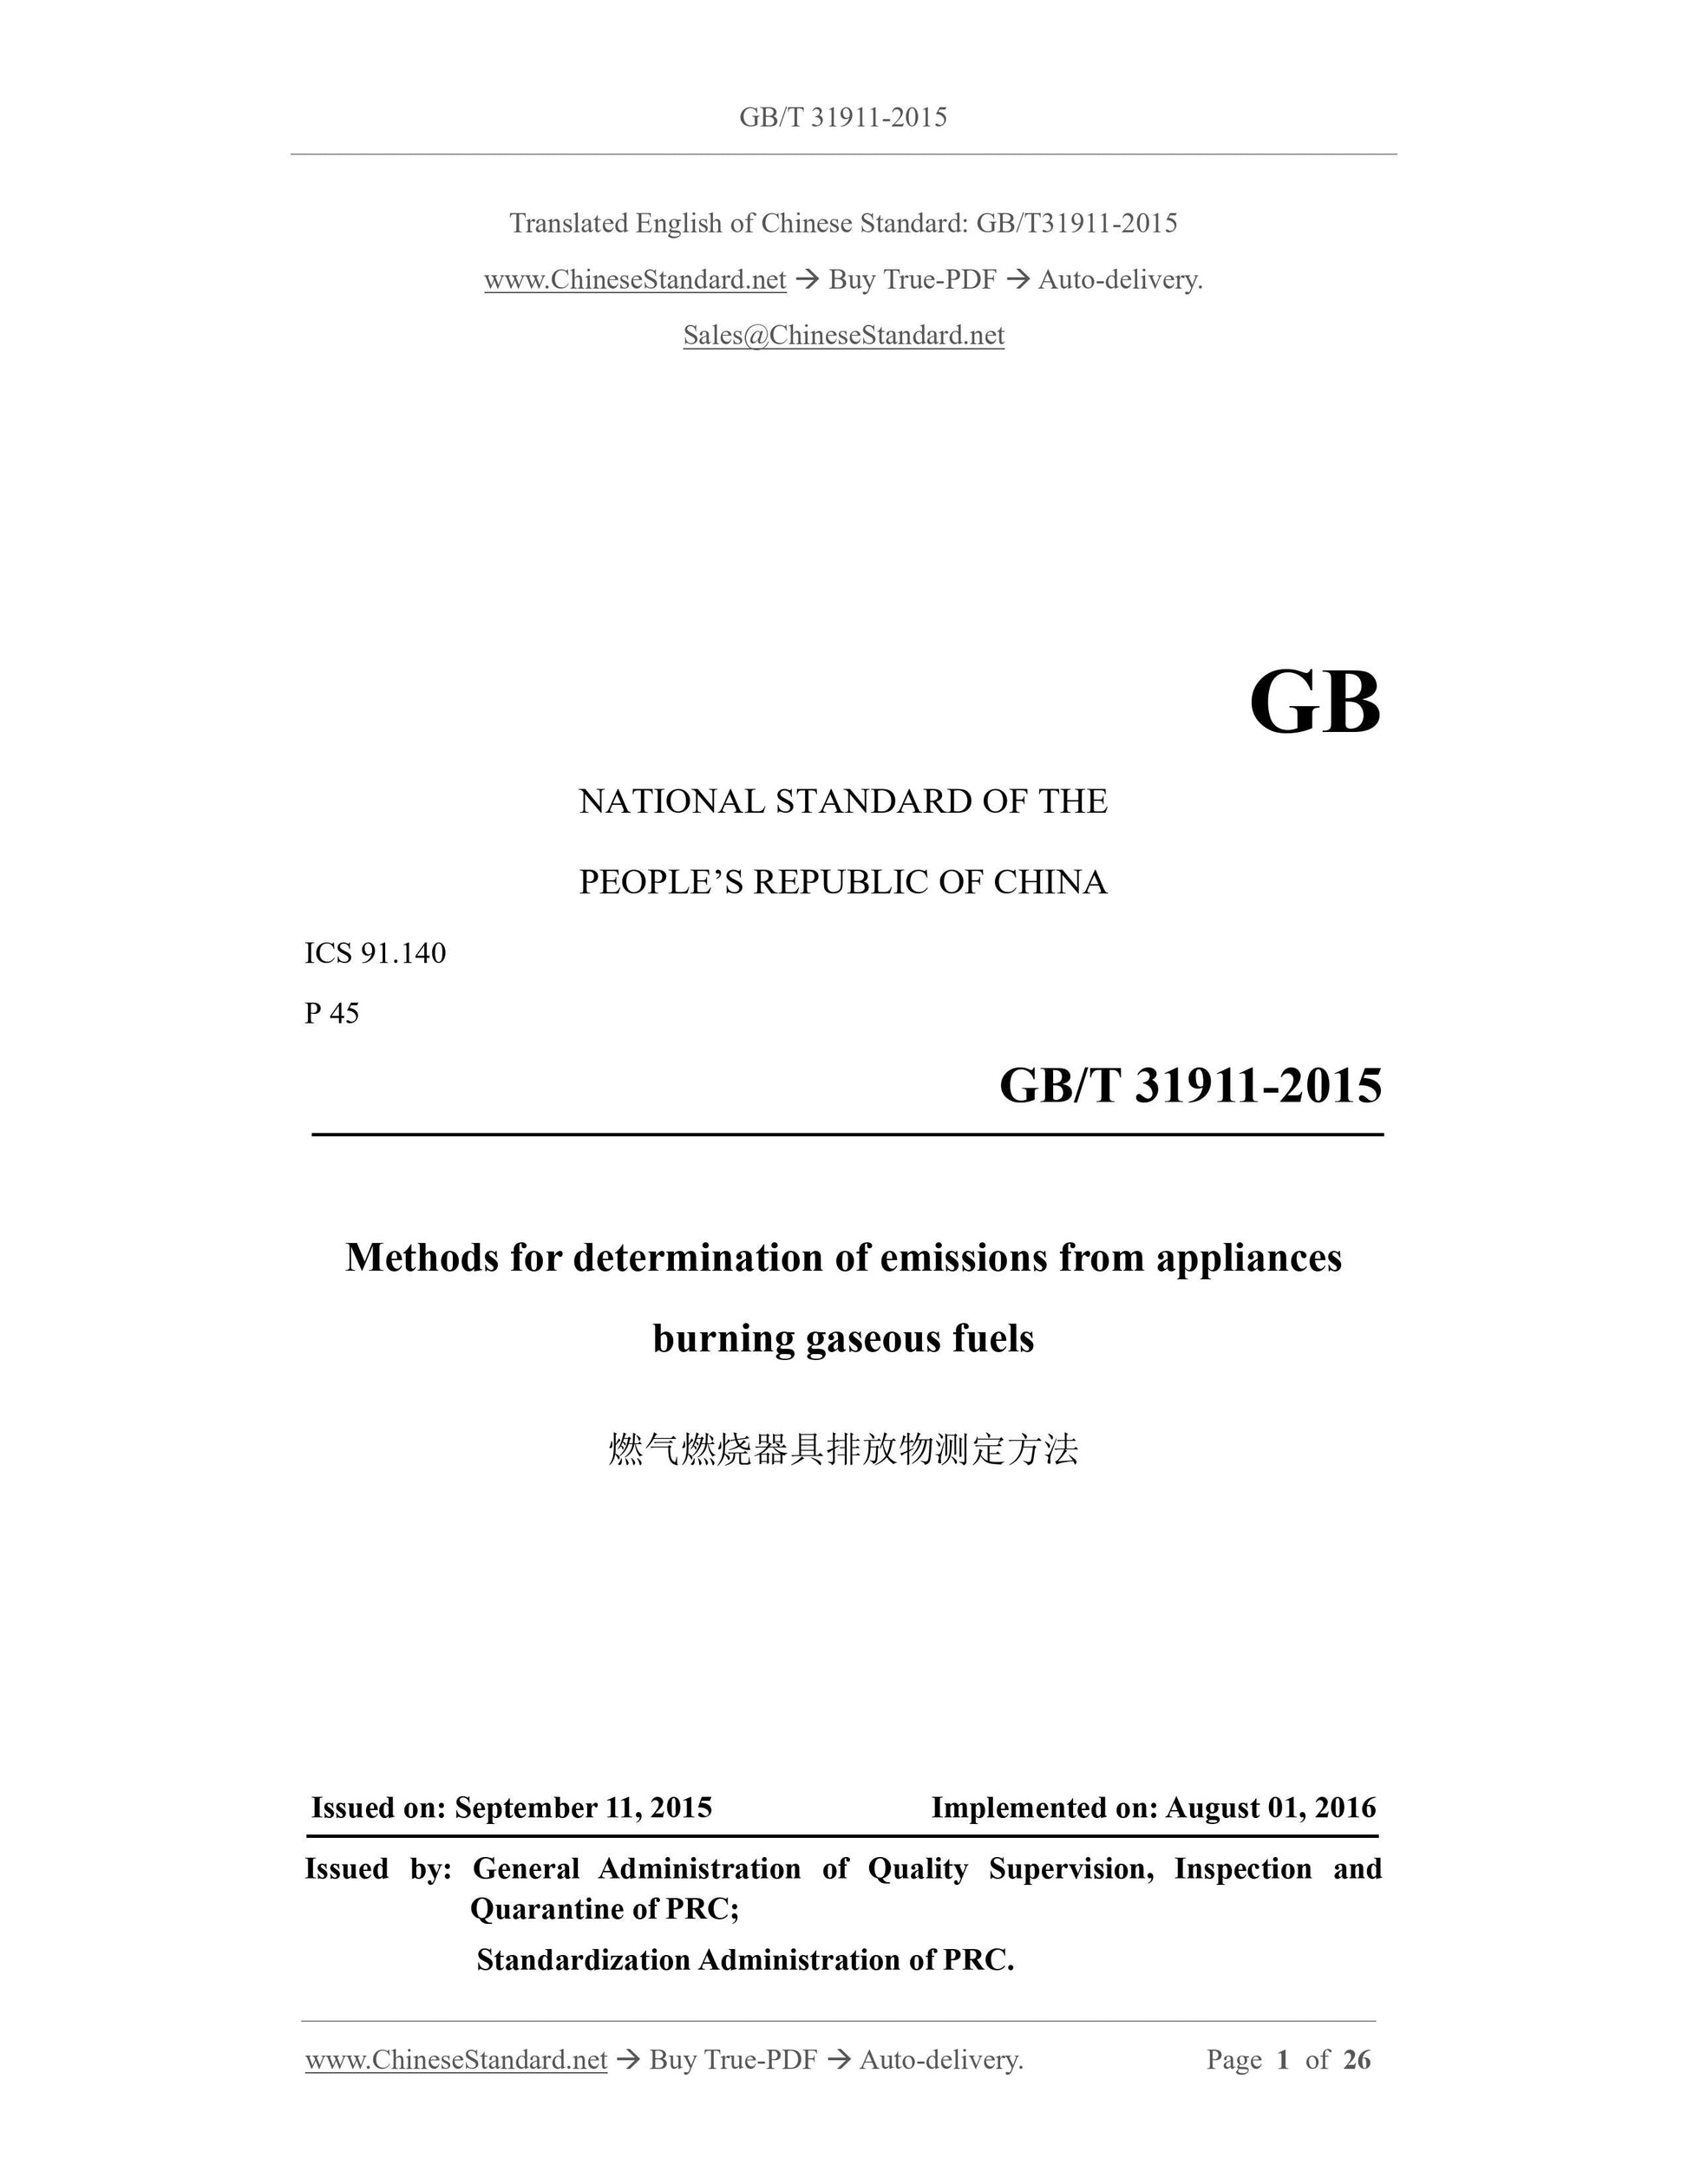 GB/T 31911-2015 Page 1